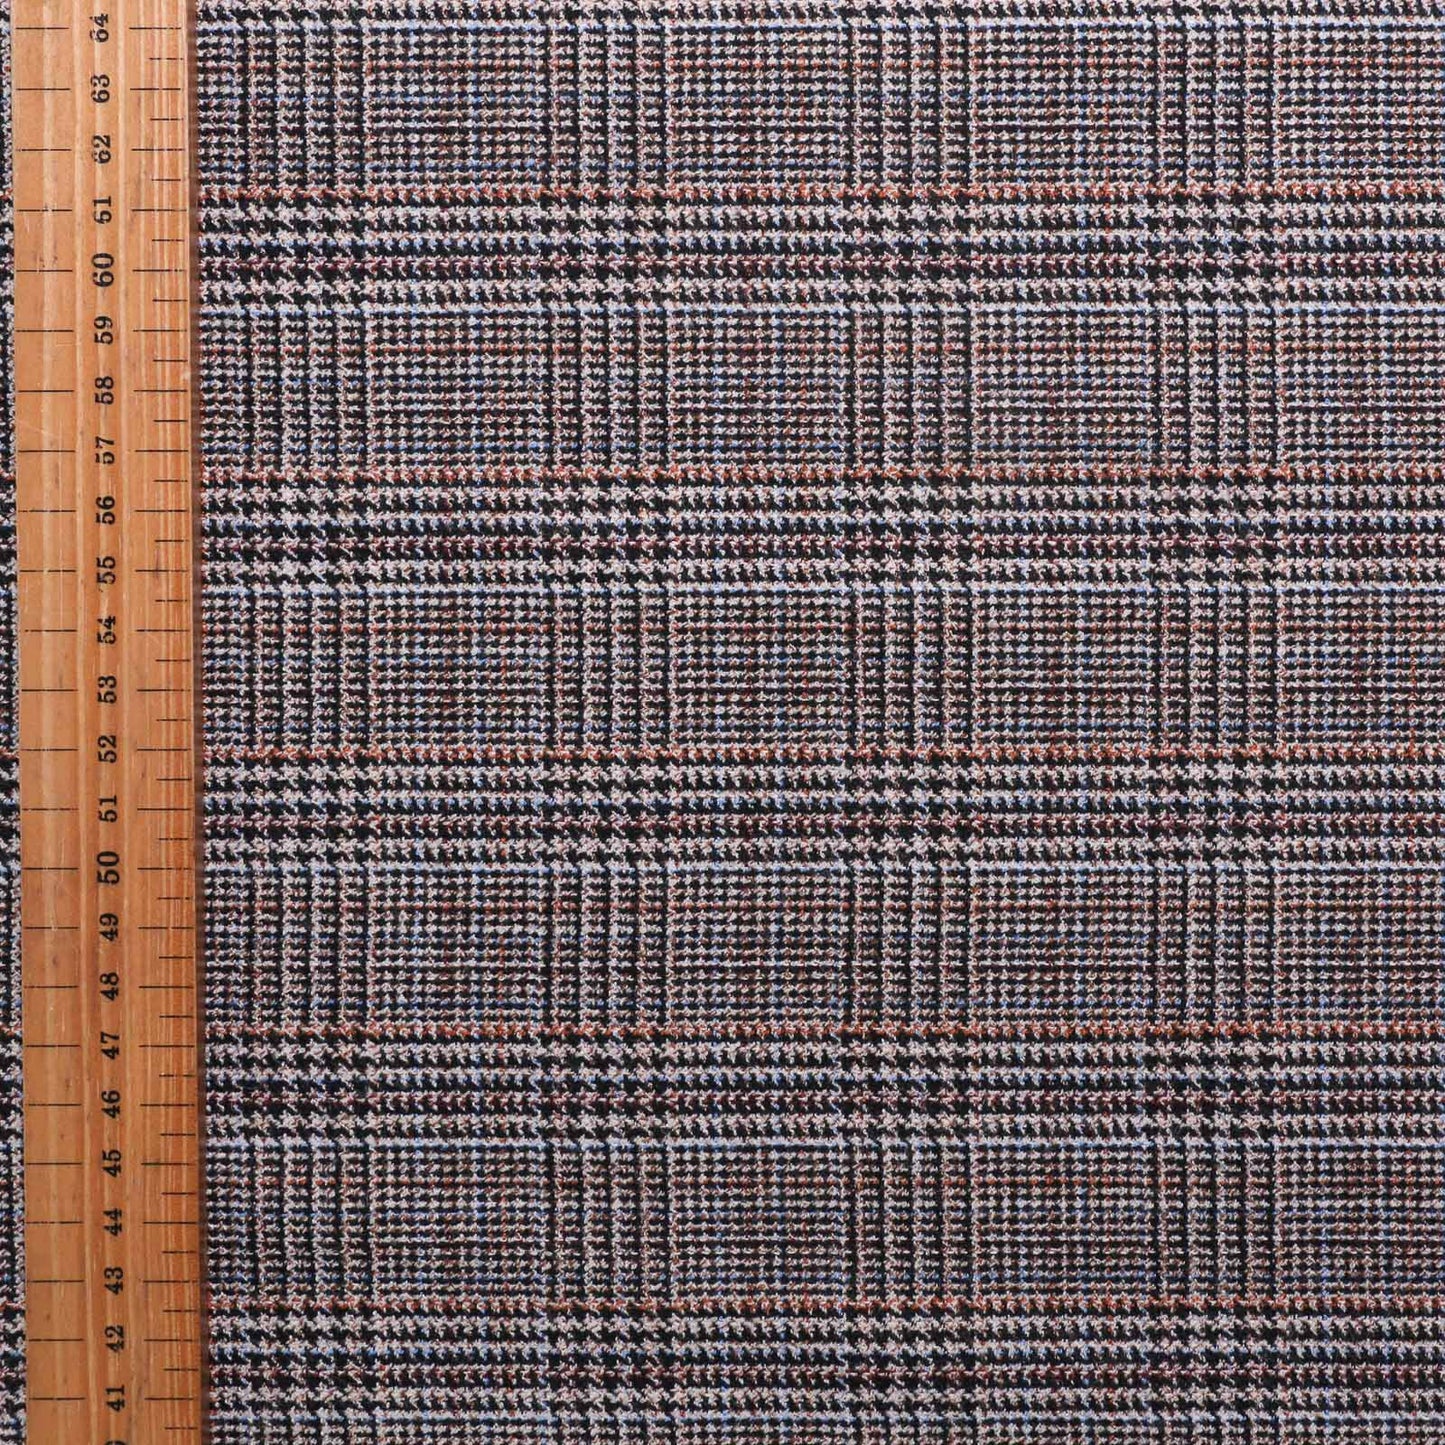 metre wool blend stretchy suiting dressmaking fabric with black and caramel check pattern on beige